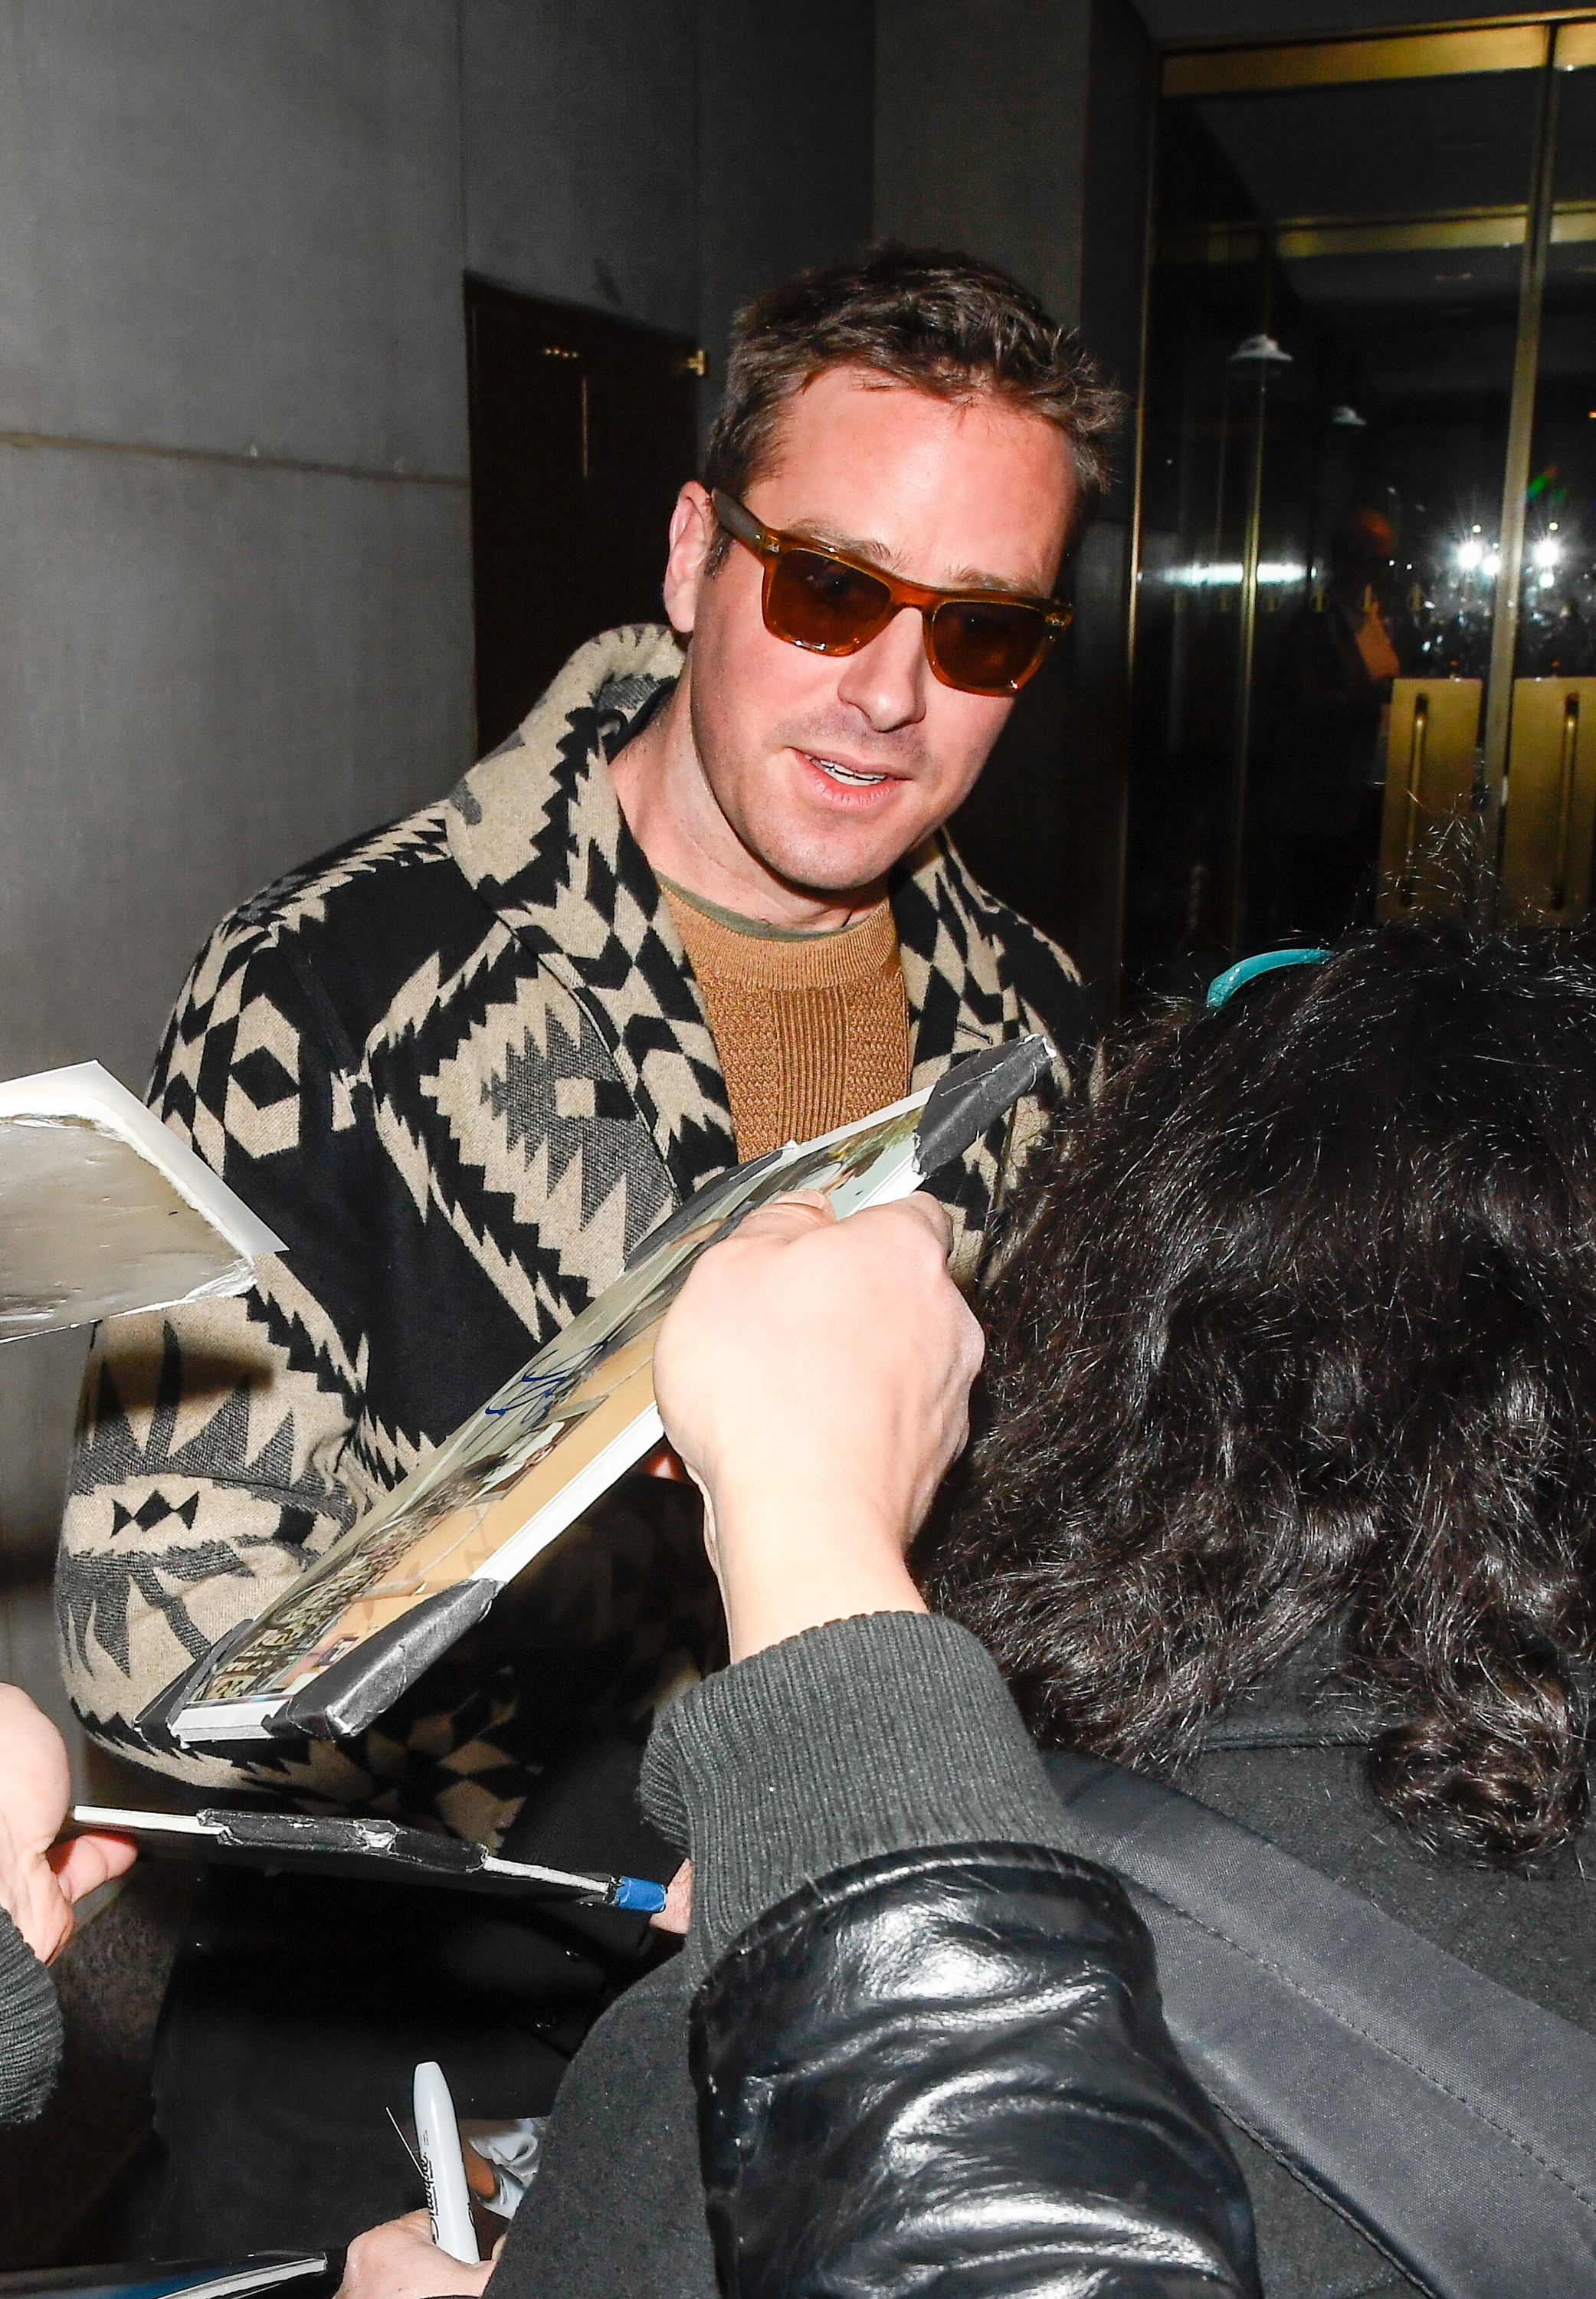 Armie Hammer is seen outside the Today Show speaking to people seeking autographs